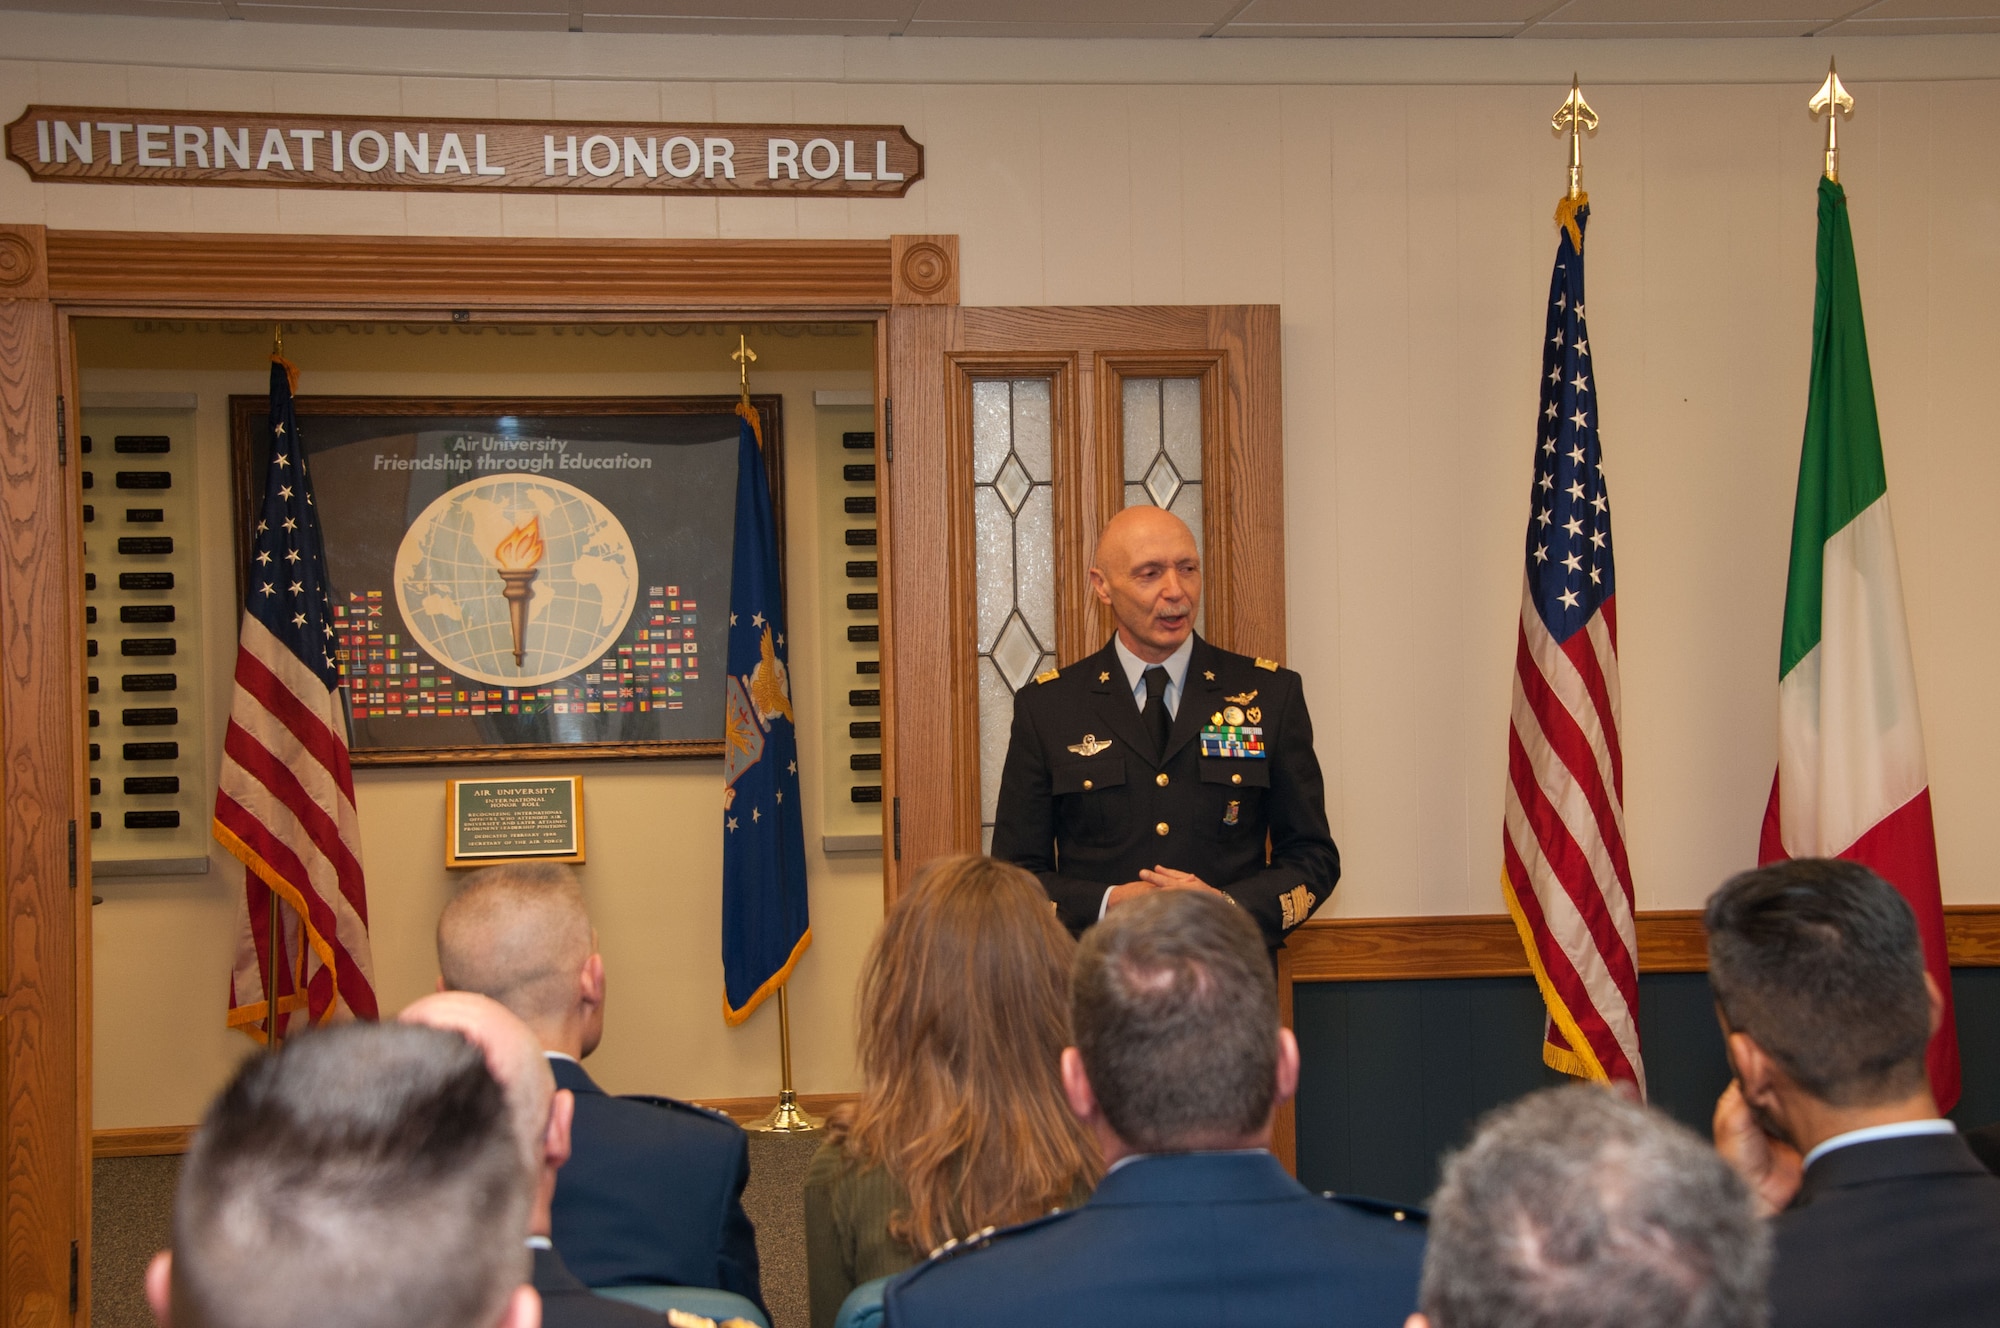 Lt. Gen. Enzo Vecciarelli, Chief of Staff of the Italian Air Force, speaks to attendees of the International Honor Roll Induction Ceremony during his inauguration into the IHR program on Maxwell Air Force Base, Ala., Feb. 10, 2017. Vecciarelli is one of more than 400 officers from 97 countries who have been inducted as of 2017. (US Air Force photo by Bud Hancock)